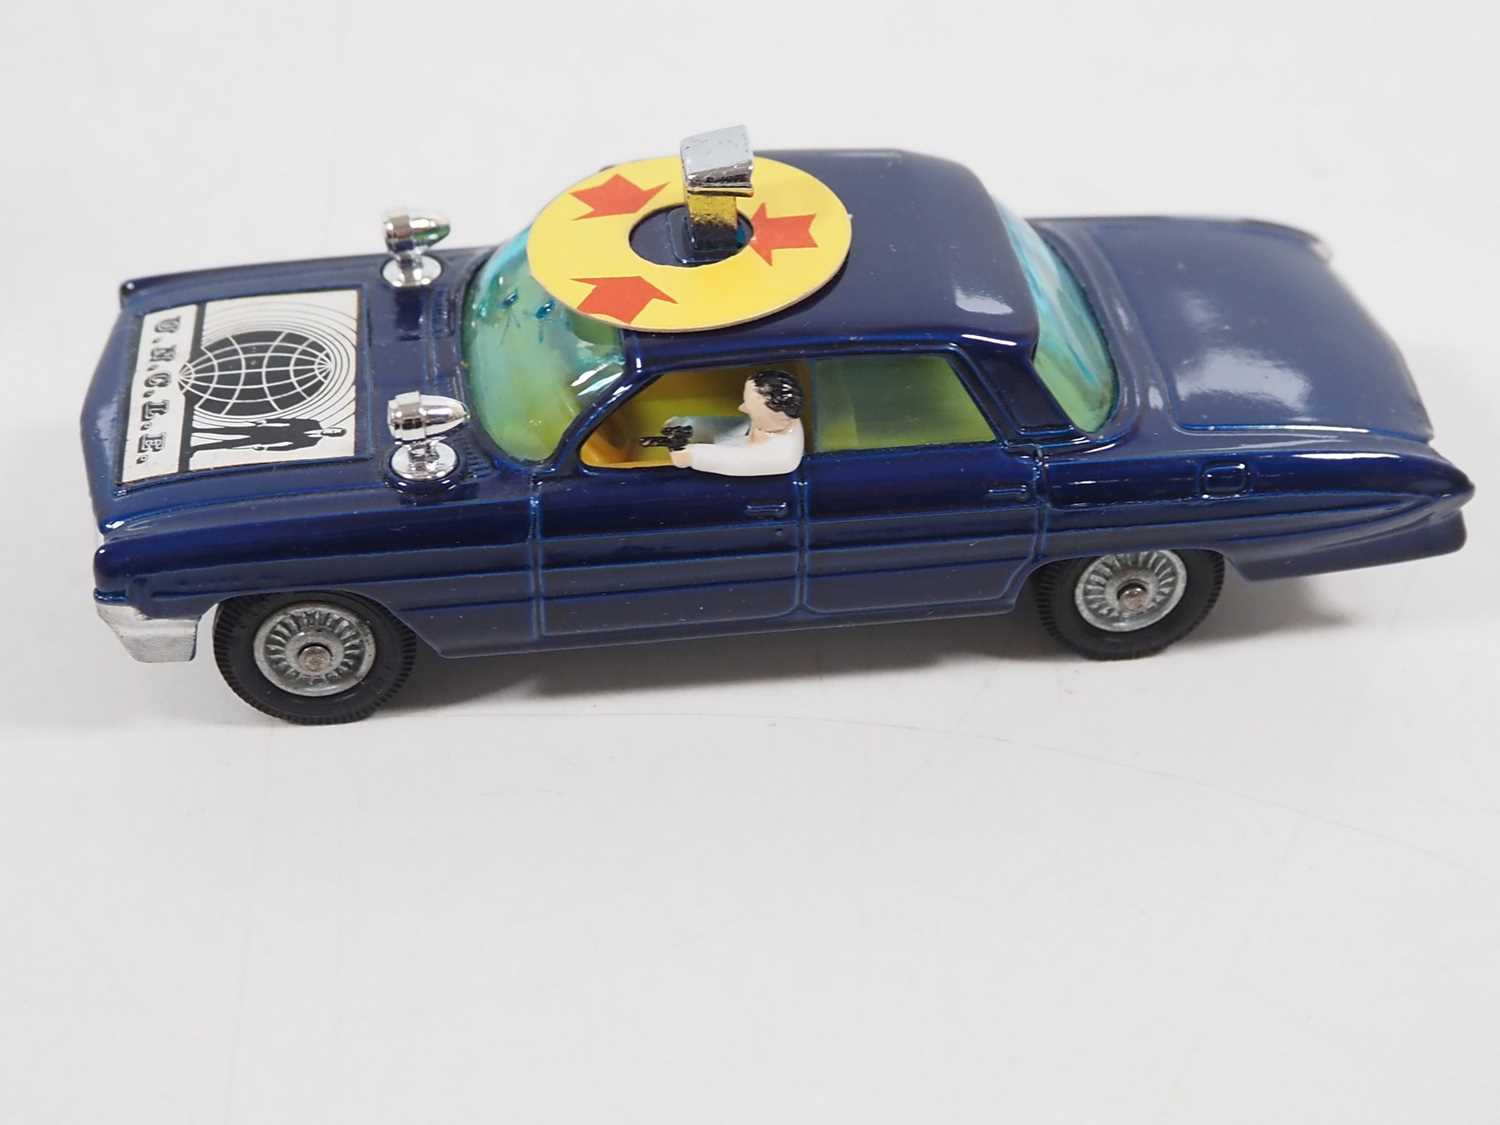 A CORGI 497 diecast Thrush-Buster Oldsmobile from 'The Man From U.N.C.L.E' - blue metallic version - - Image 3 of 9